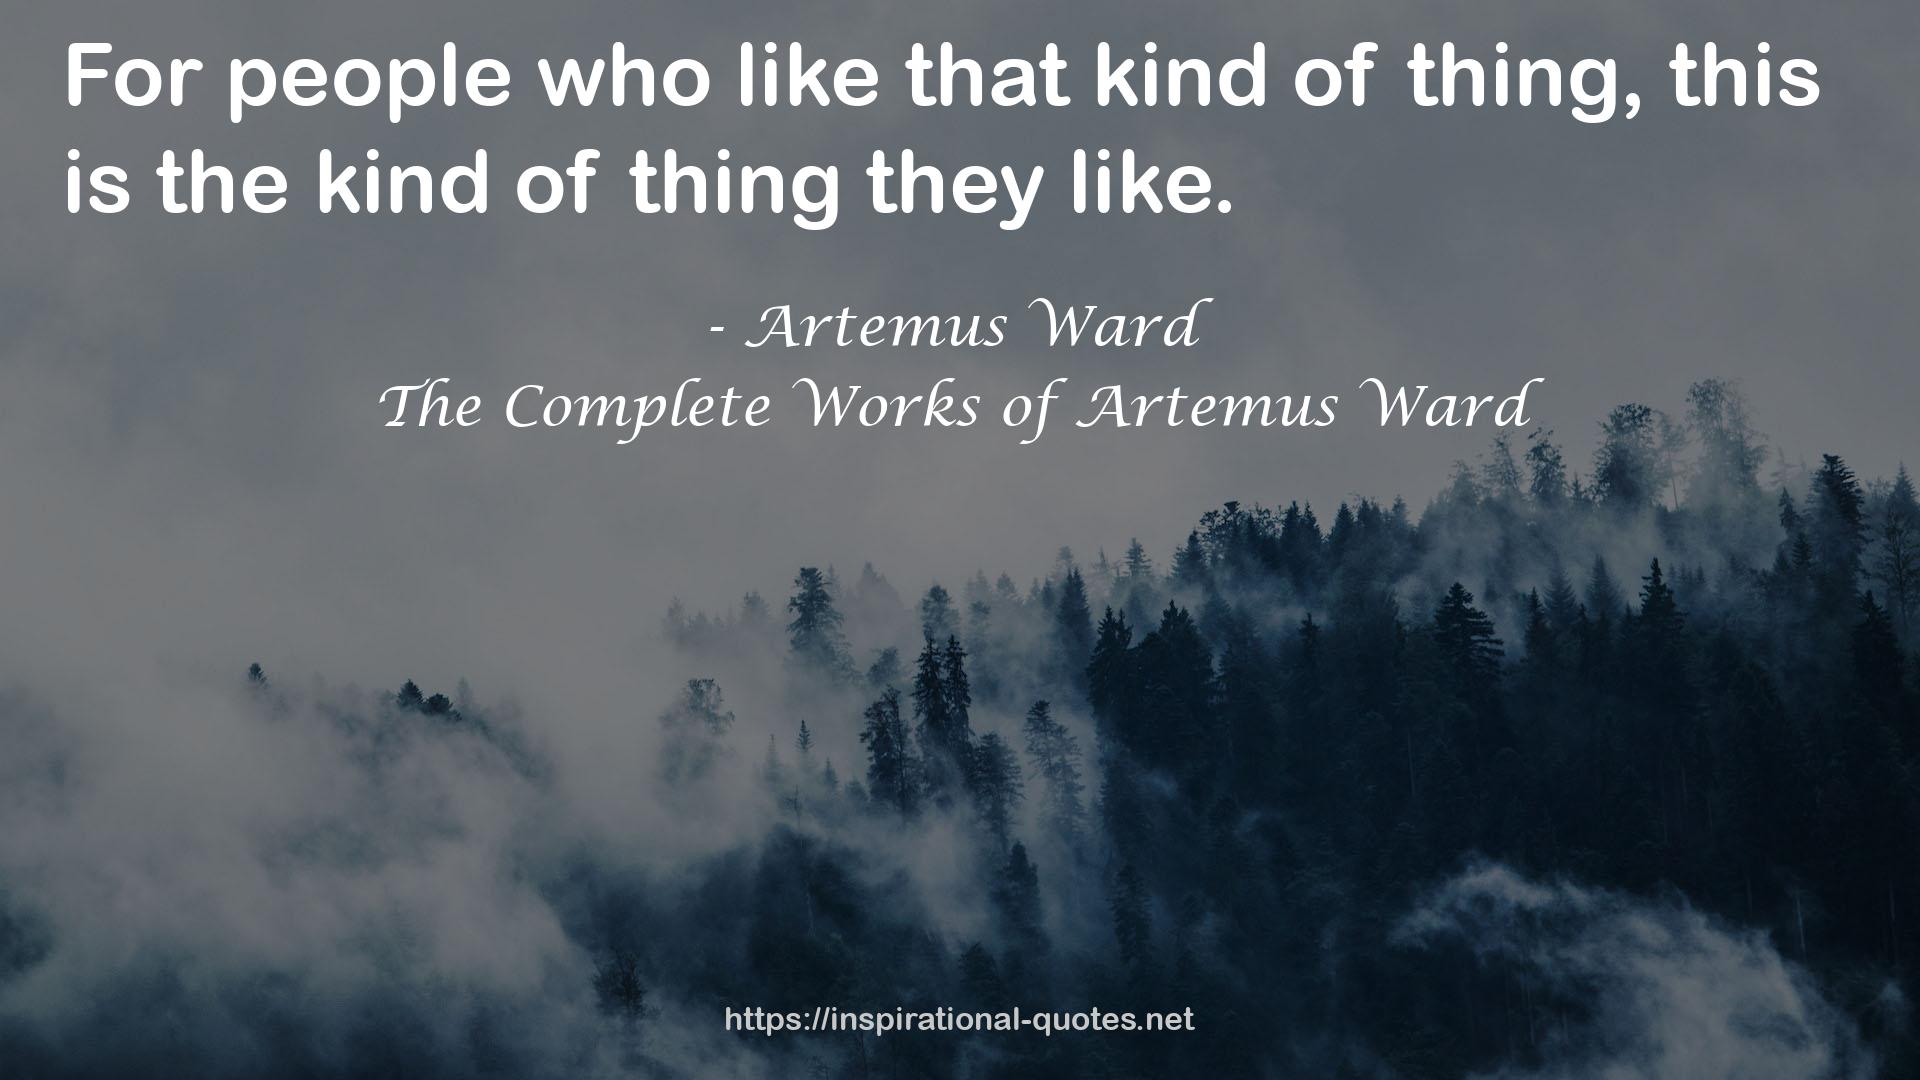 The Complete Works of Artemus Ward QUOTES